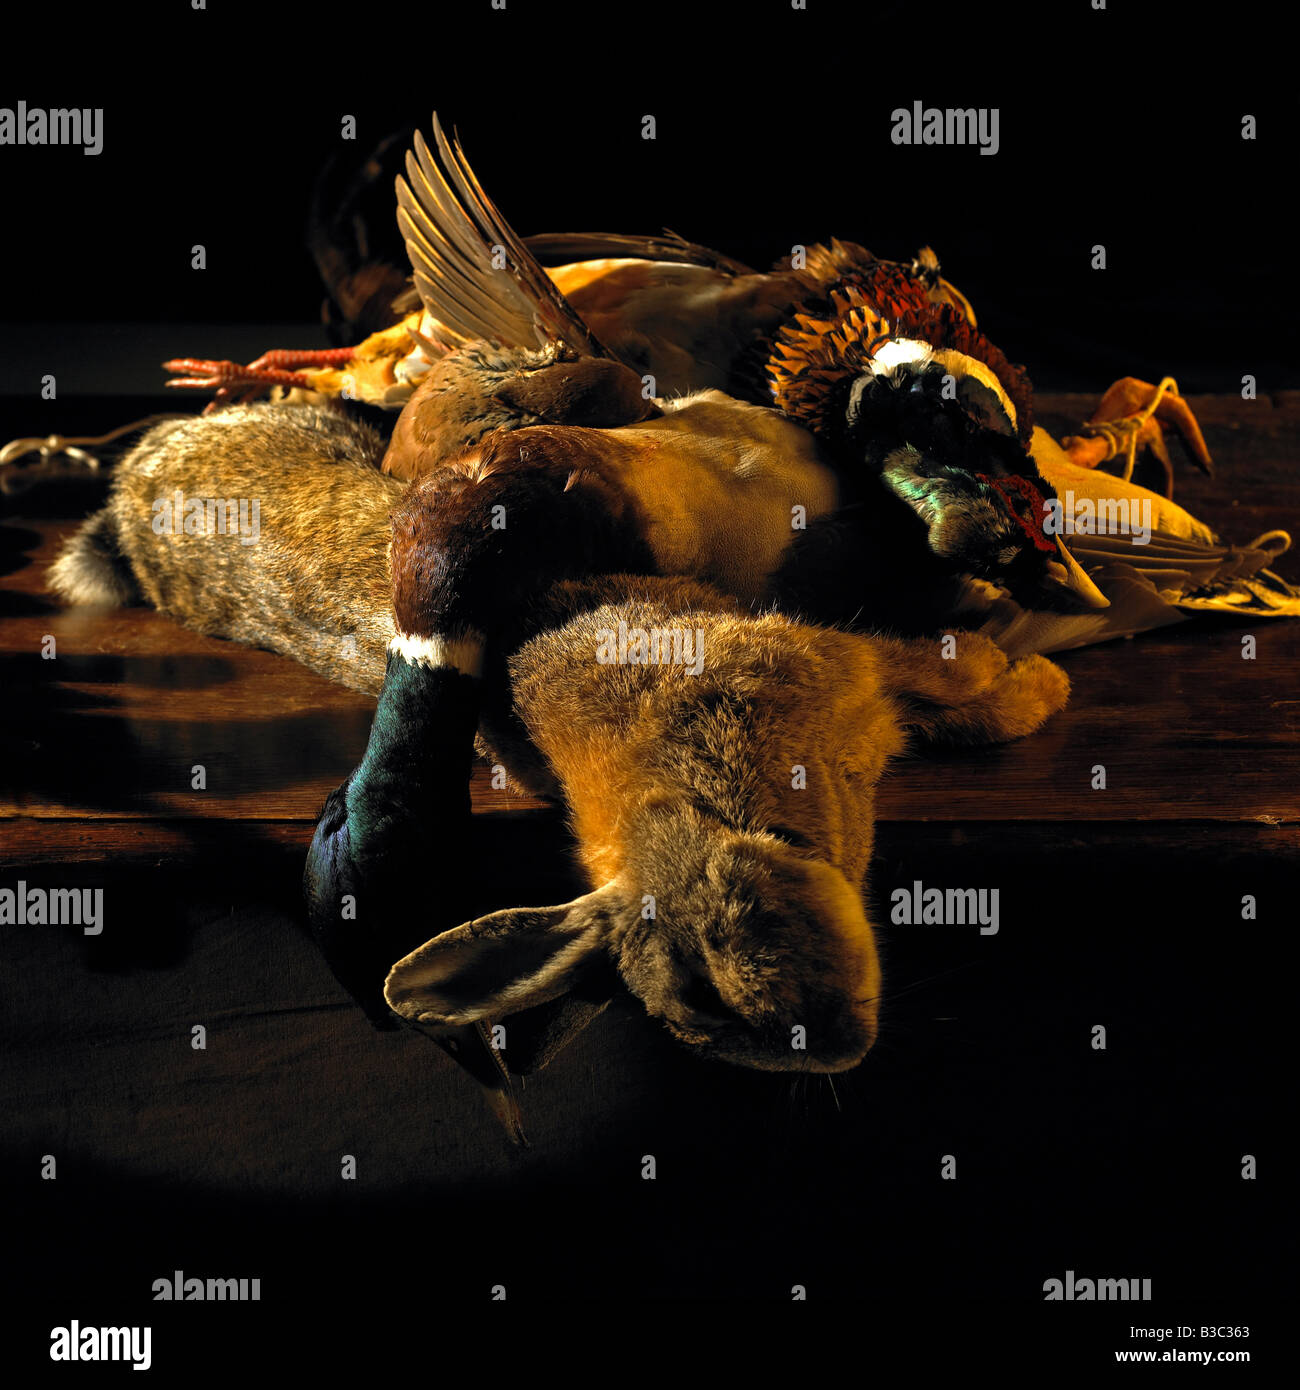 Game birds laying across a table Stock Photo